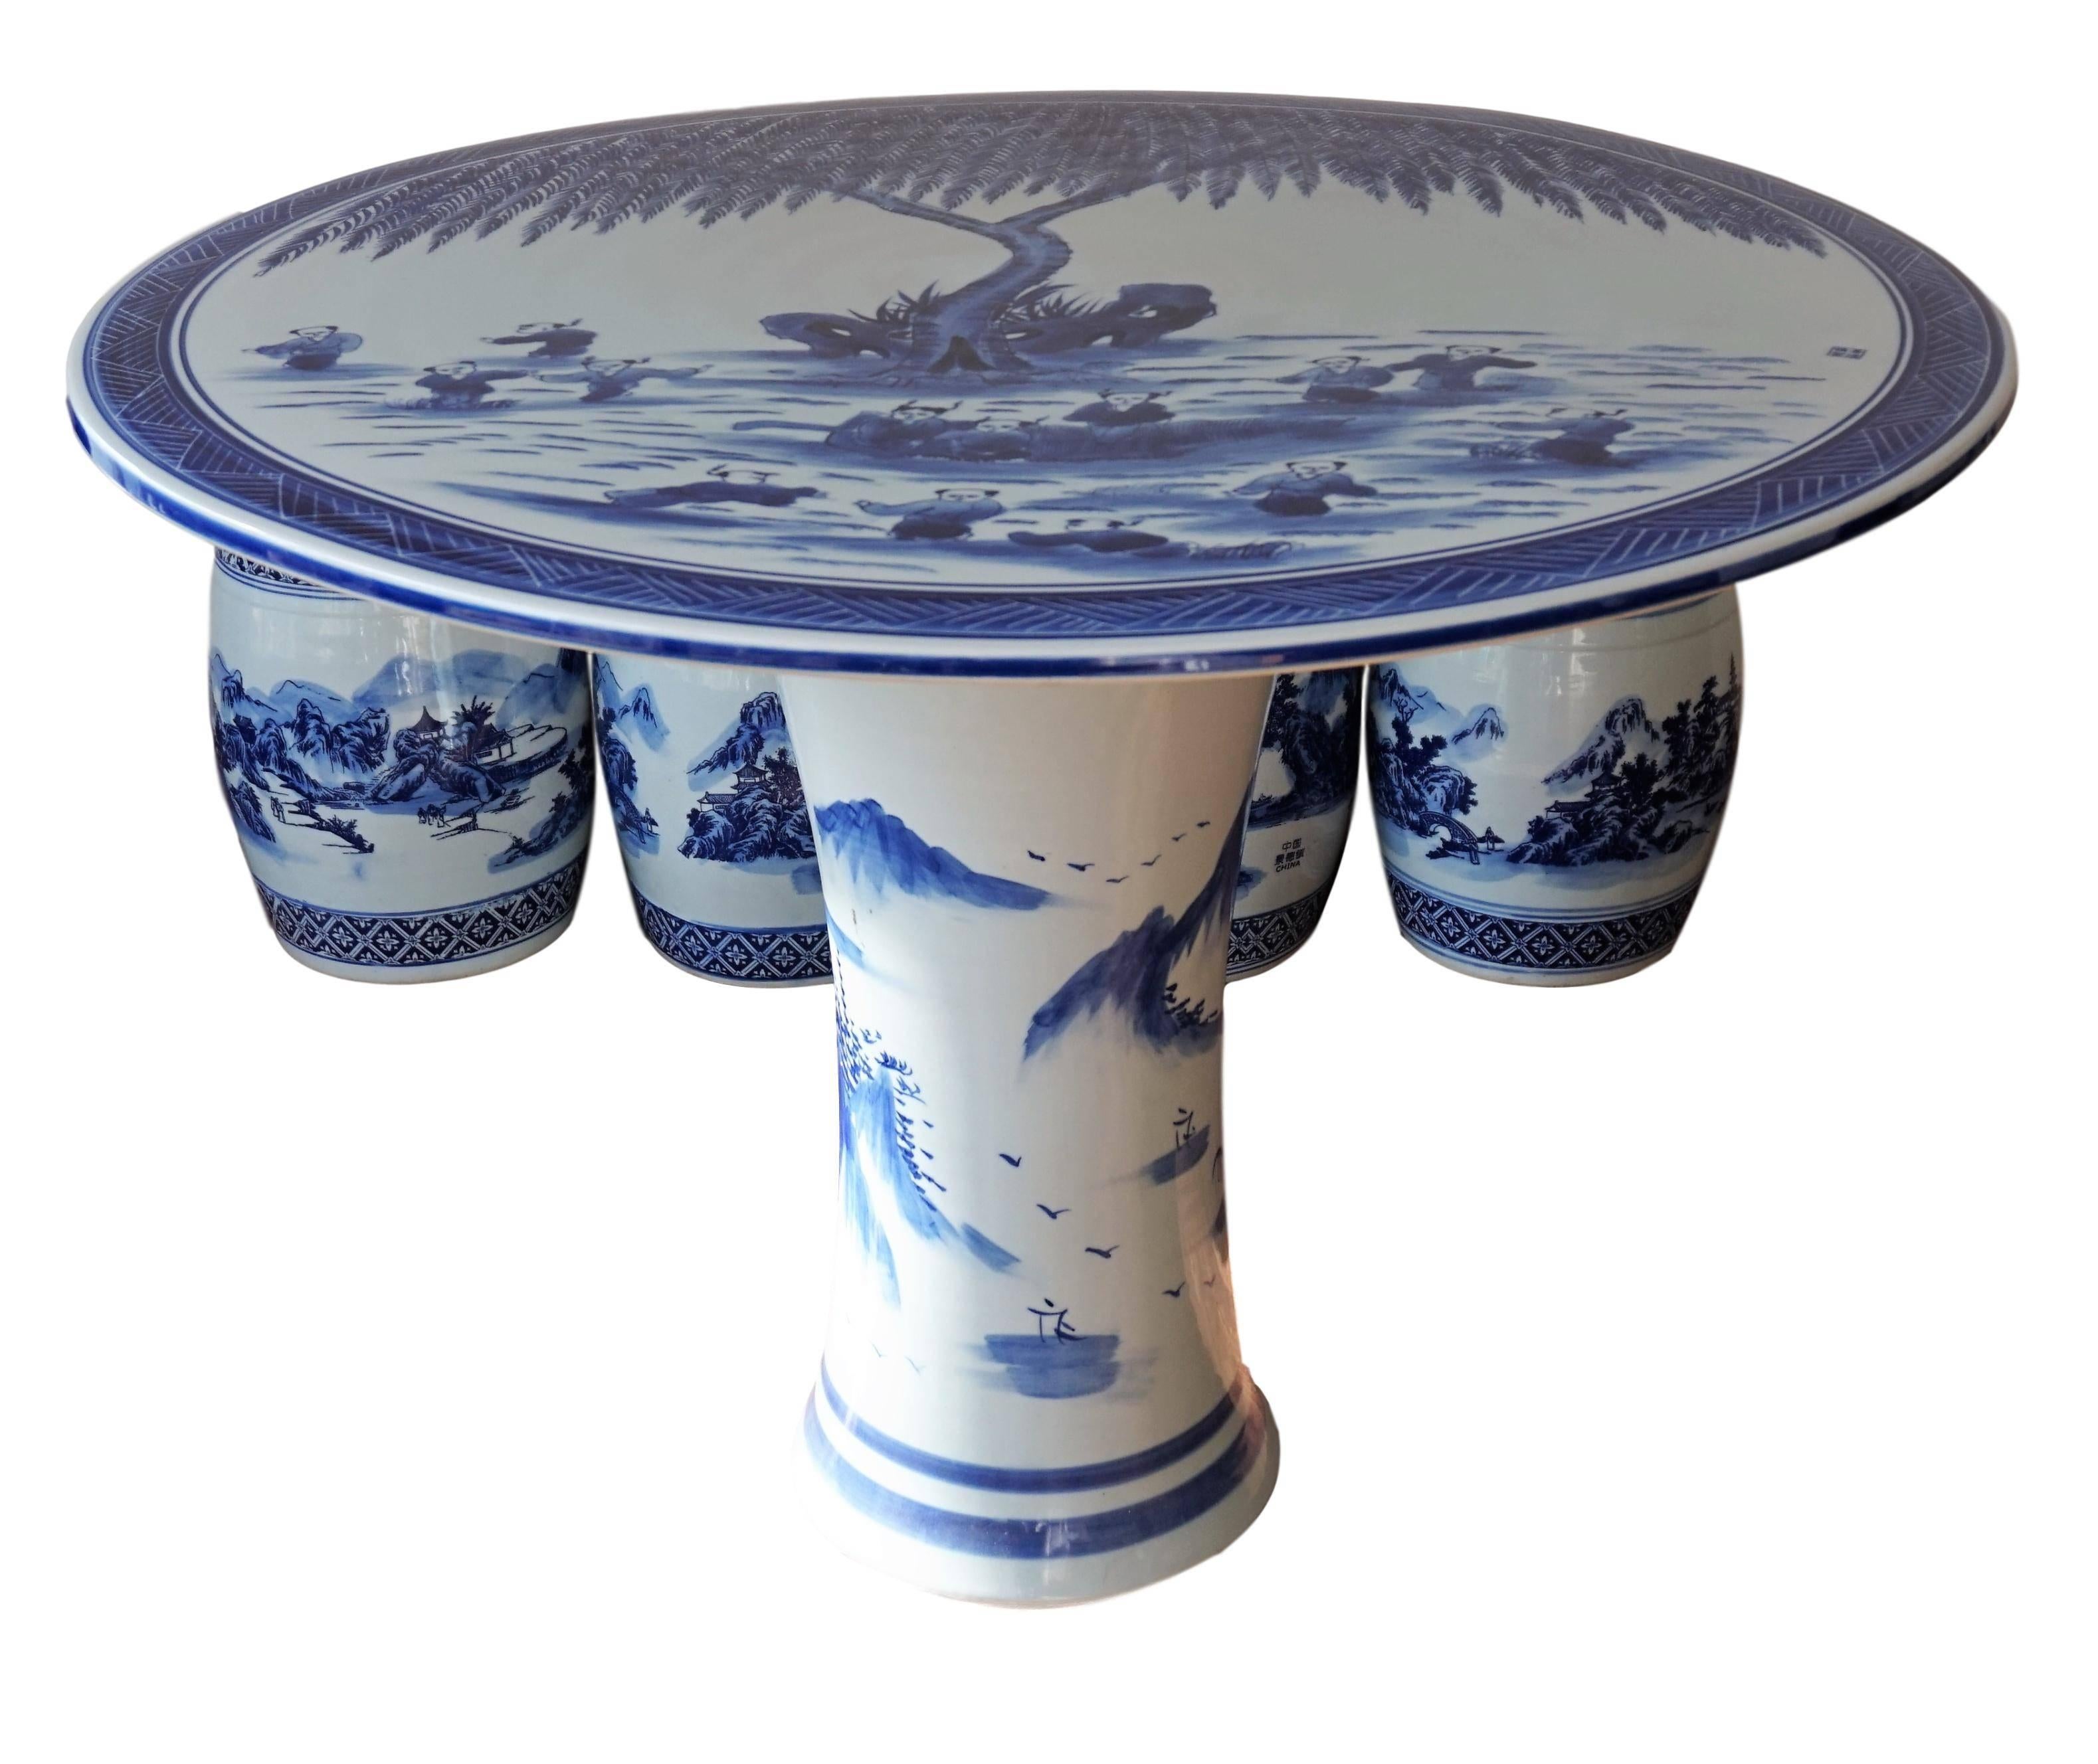 Set of traditional Chinese porcelain garden seats and table blue and white floral motif
garden stools and table
side tables.

Table measurements:
Diameter 36.81 in
Height 27.95 in.

Stools measurements:
Diameter 11.41 in
Height 14.75 in.